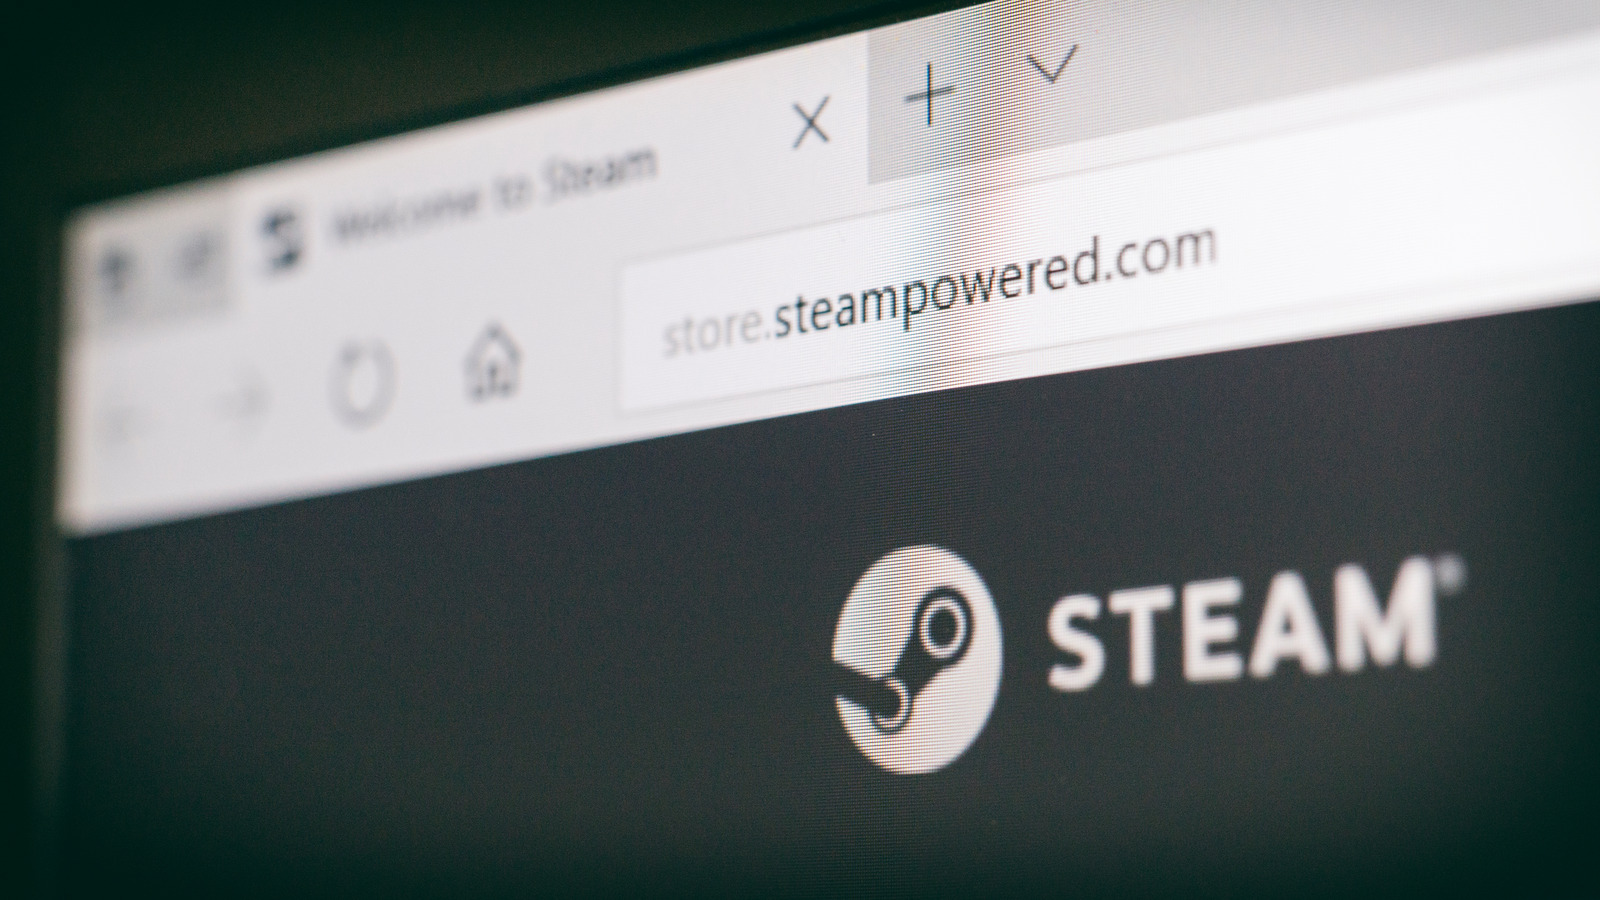 Watch out: profile images on Steam could contain malware